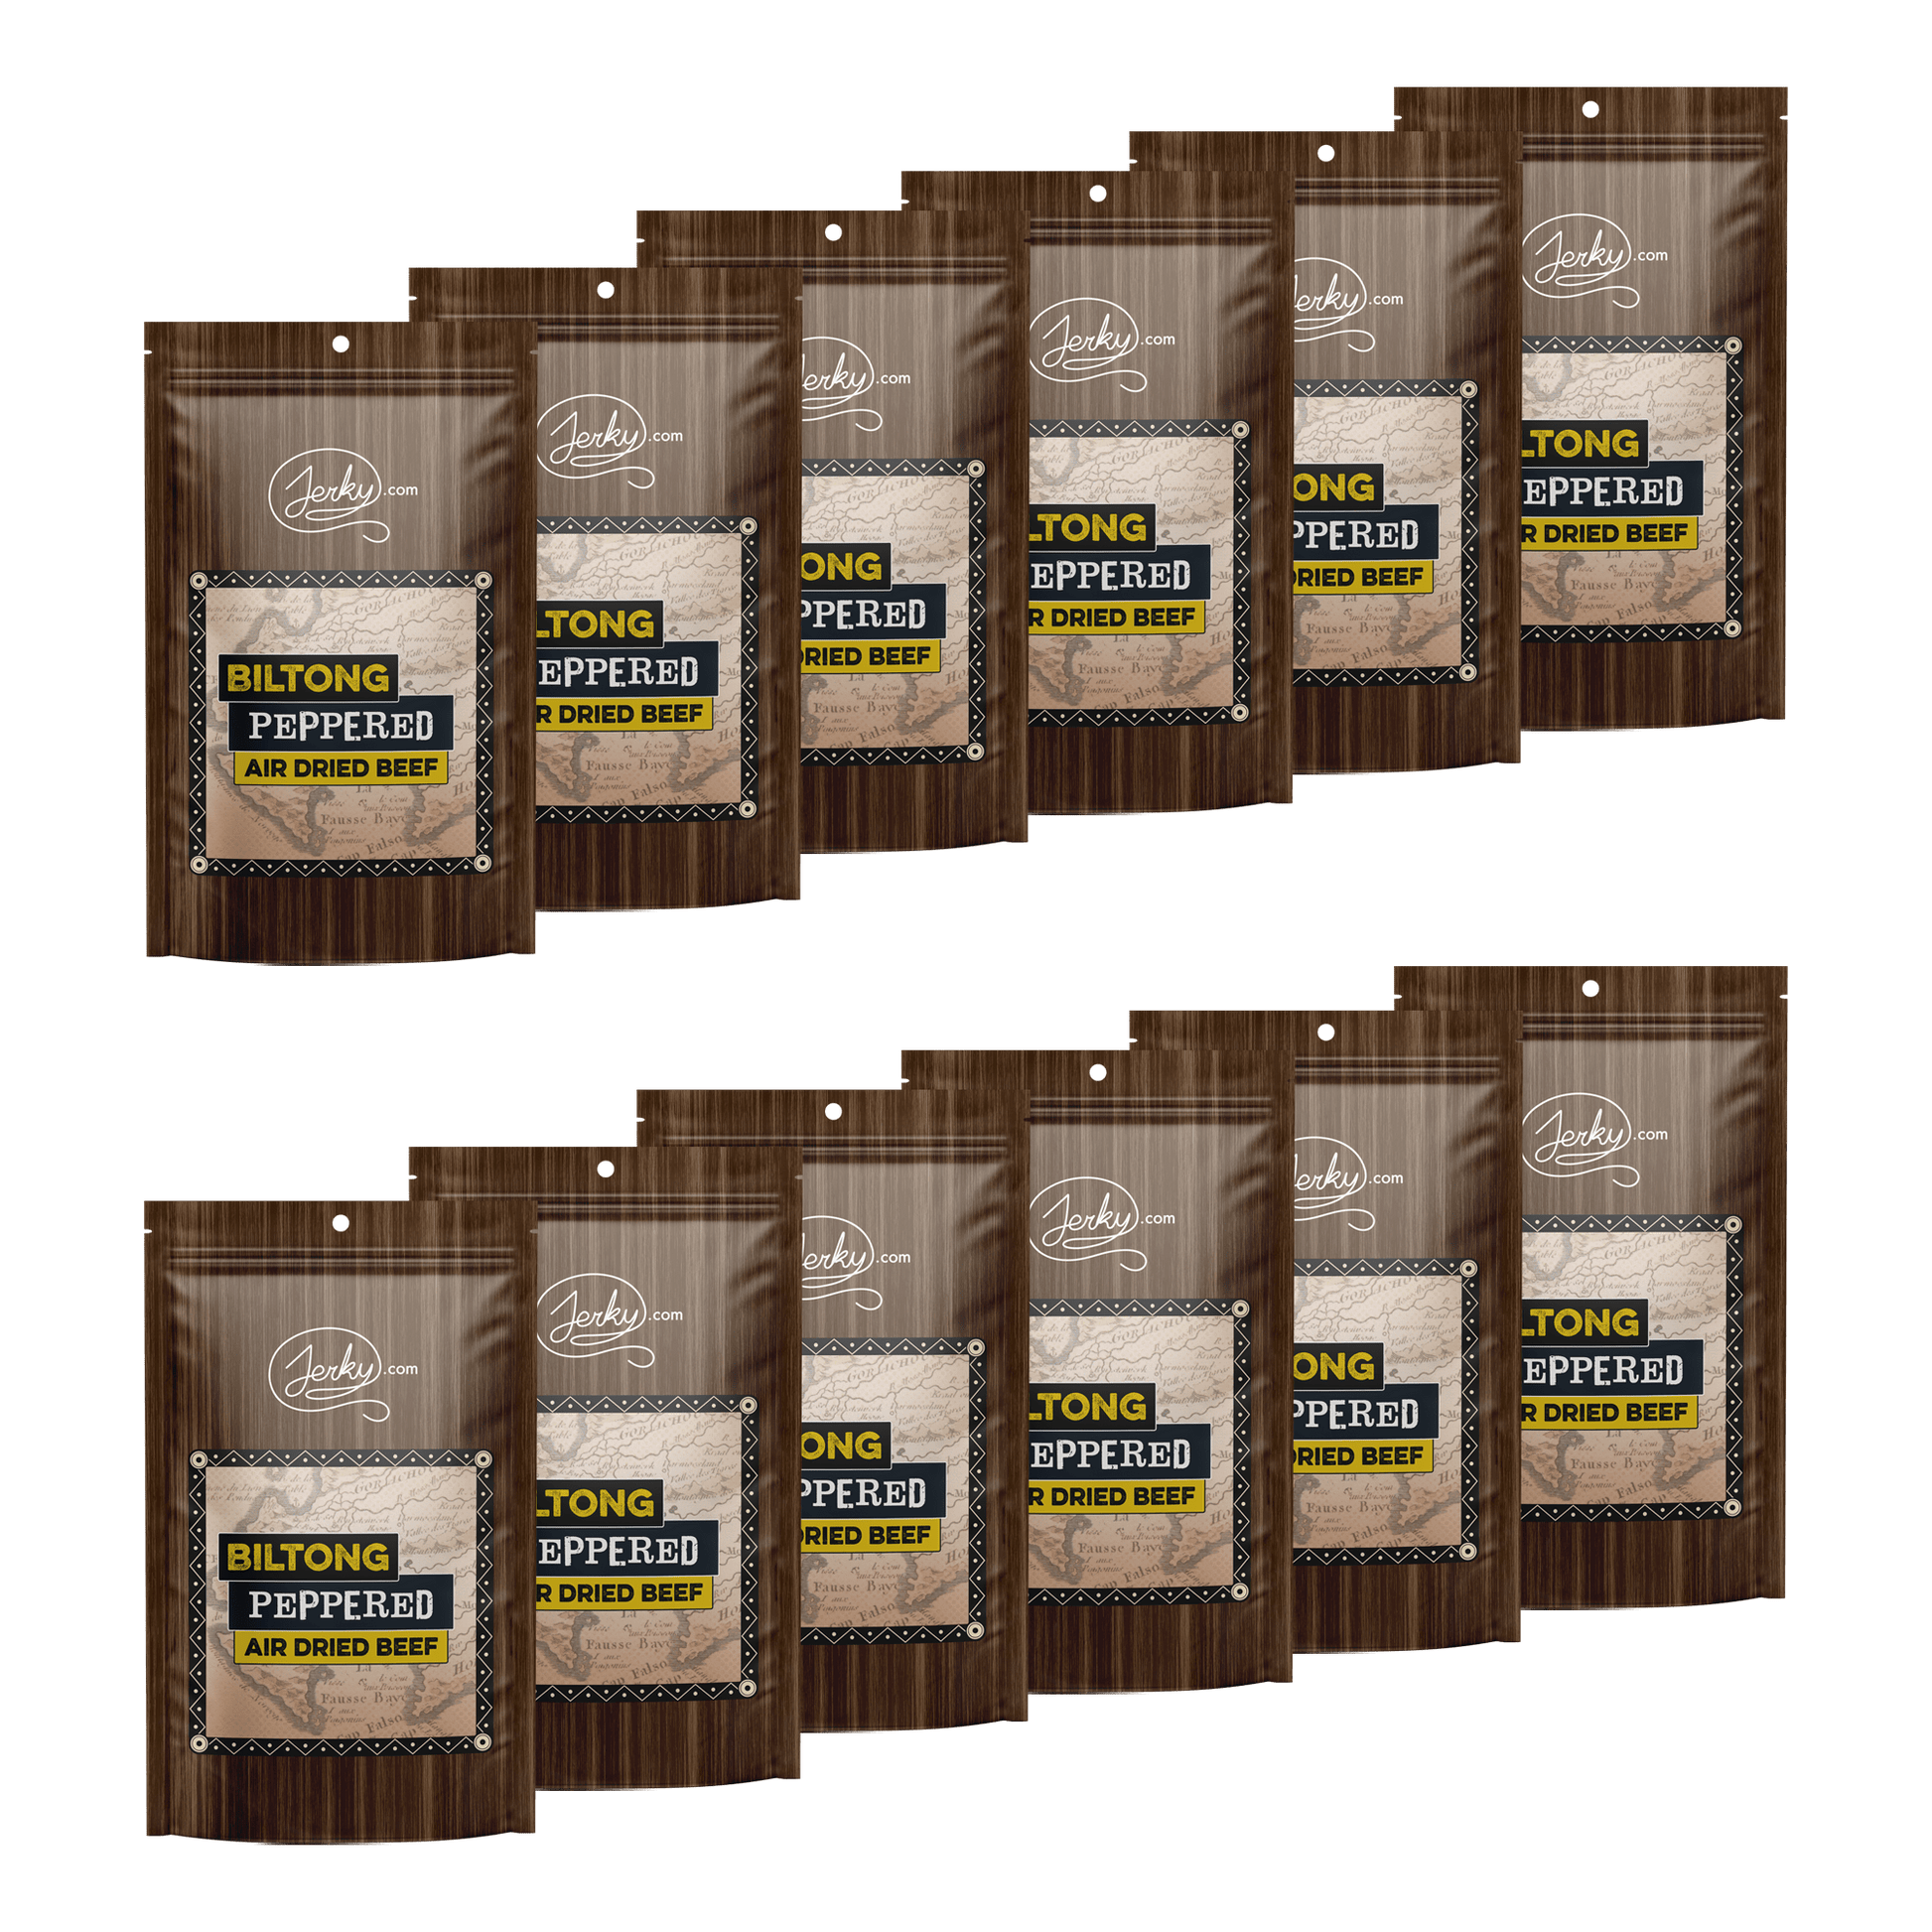 All-Natural Beef Biltong Jerky - Peppered by Jerky.com